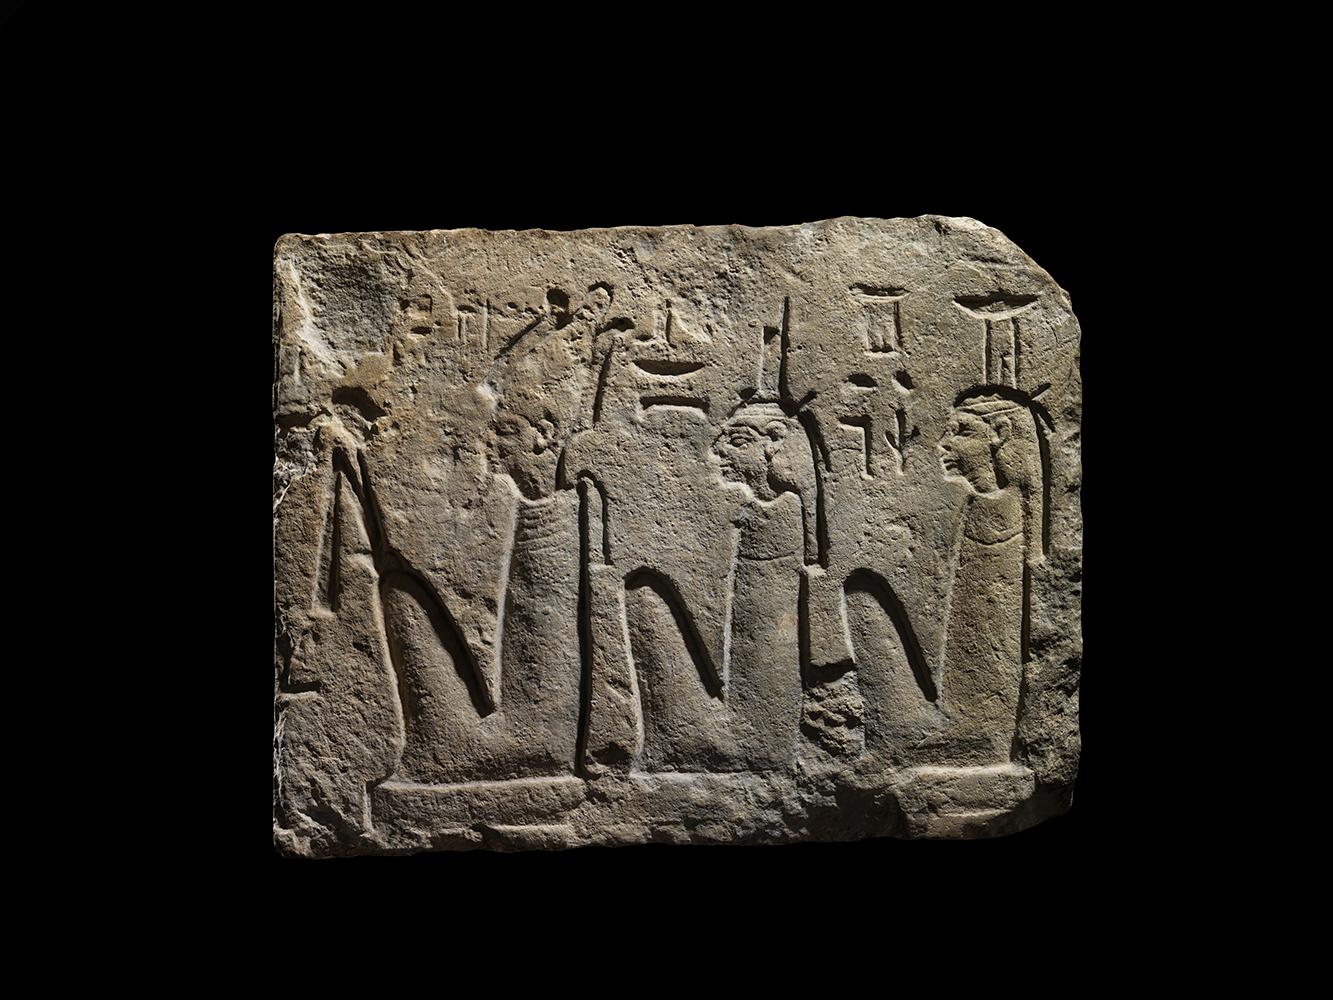 A fragment of indurated limestone carved in sunk relief. A row of three shrouded deities are depicted seated, facing left, each wearing a broad collar and characteristic crown. Osiris is shown with pharaonic beard and his typical feathered atef